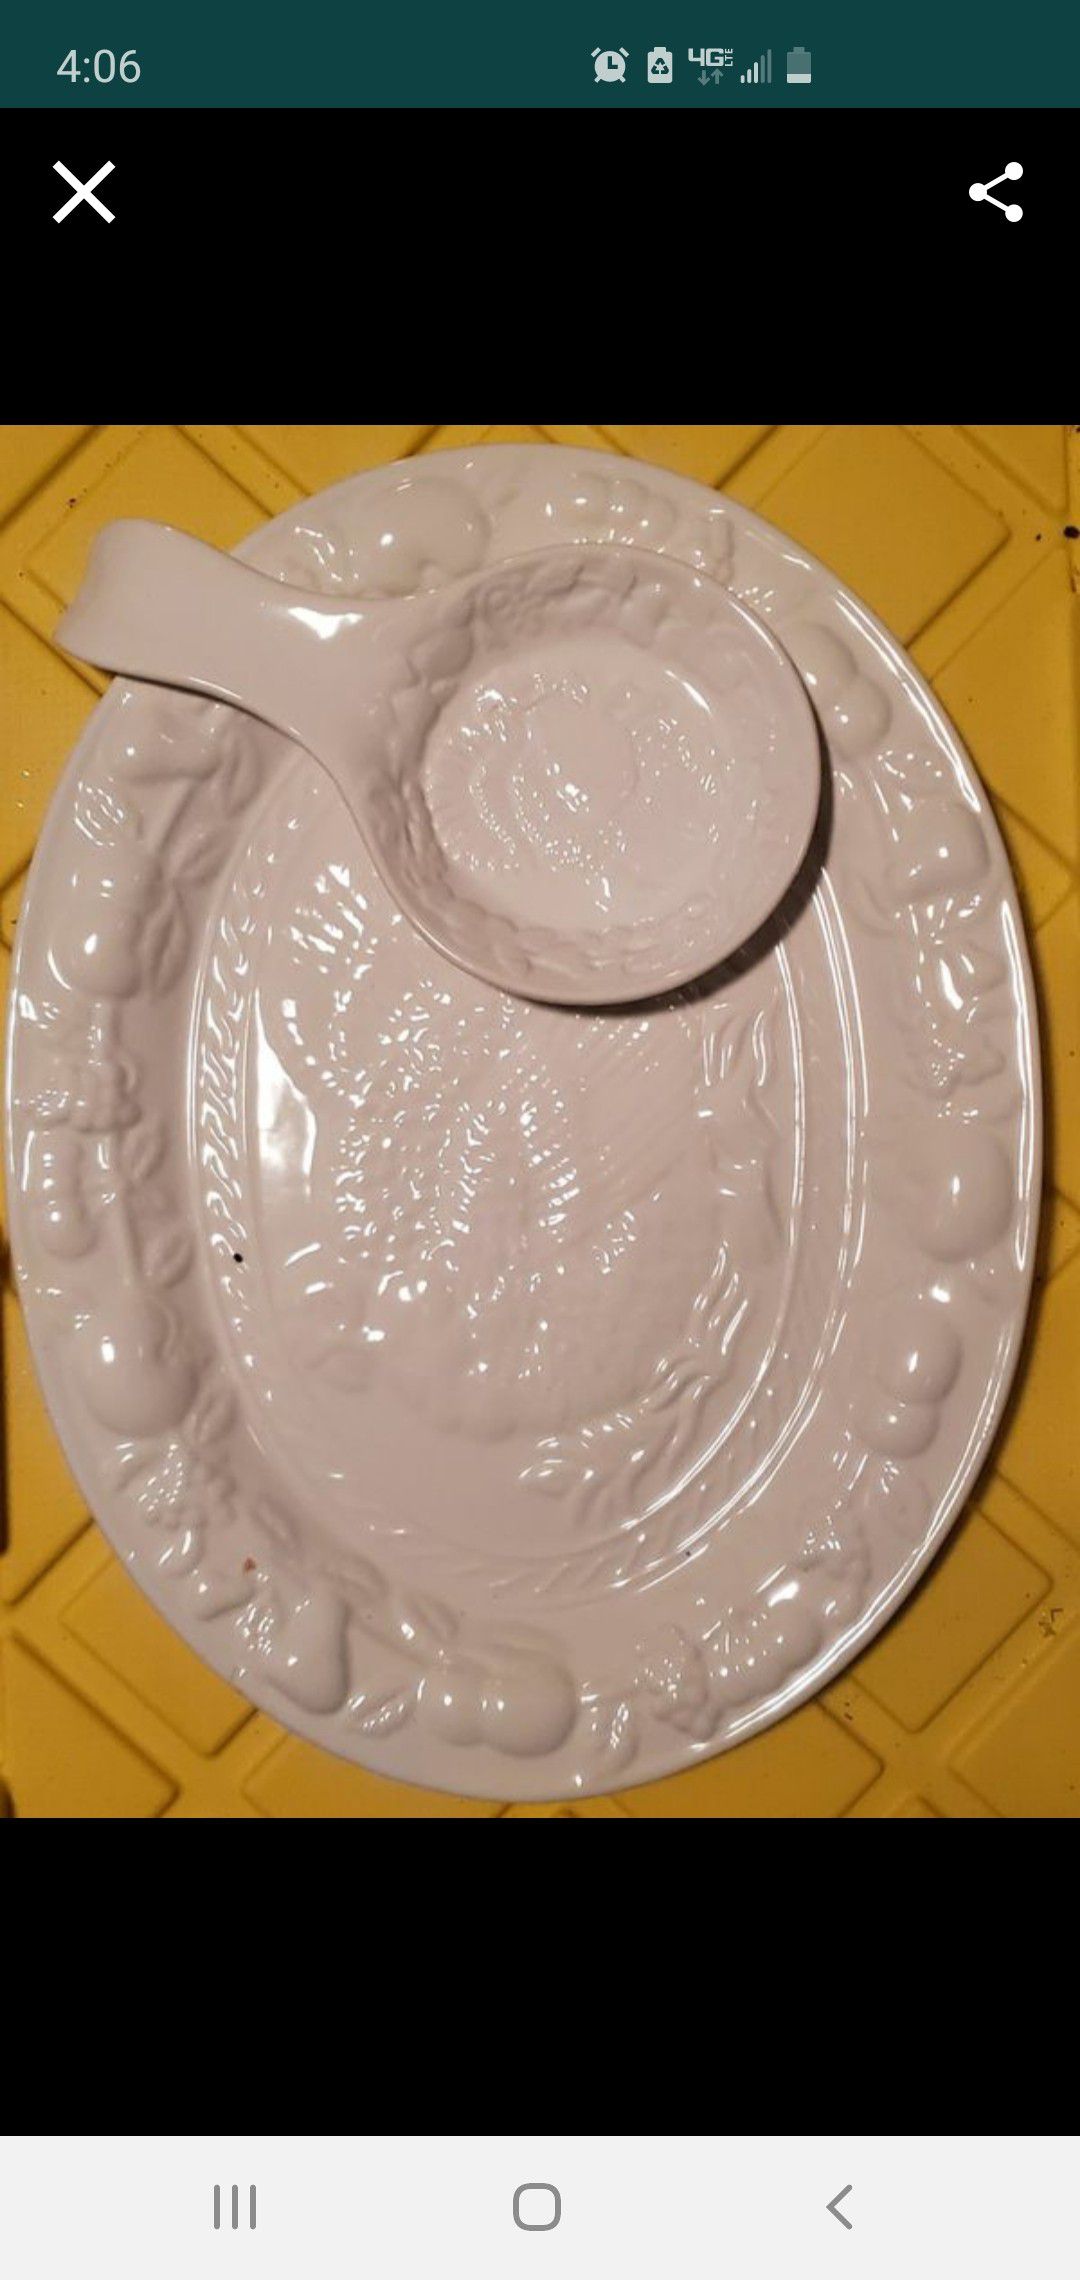 New Holiday Turkey Plate with Spoon Rest